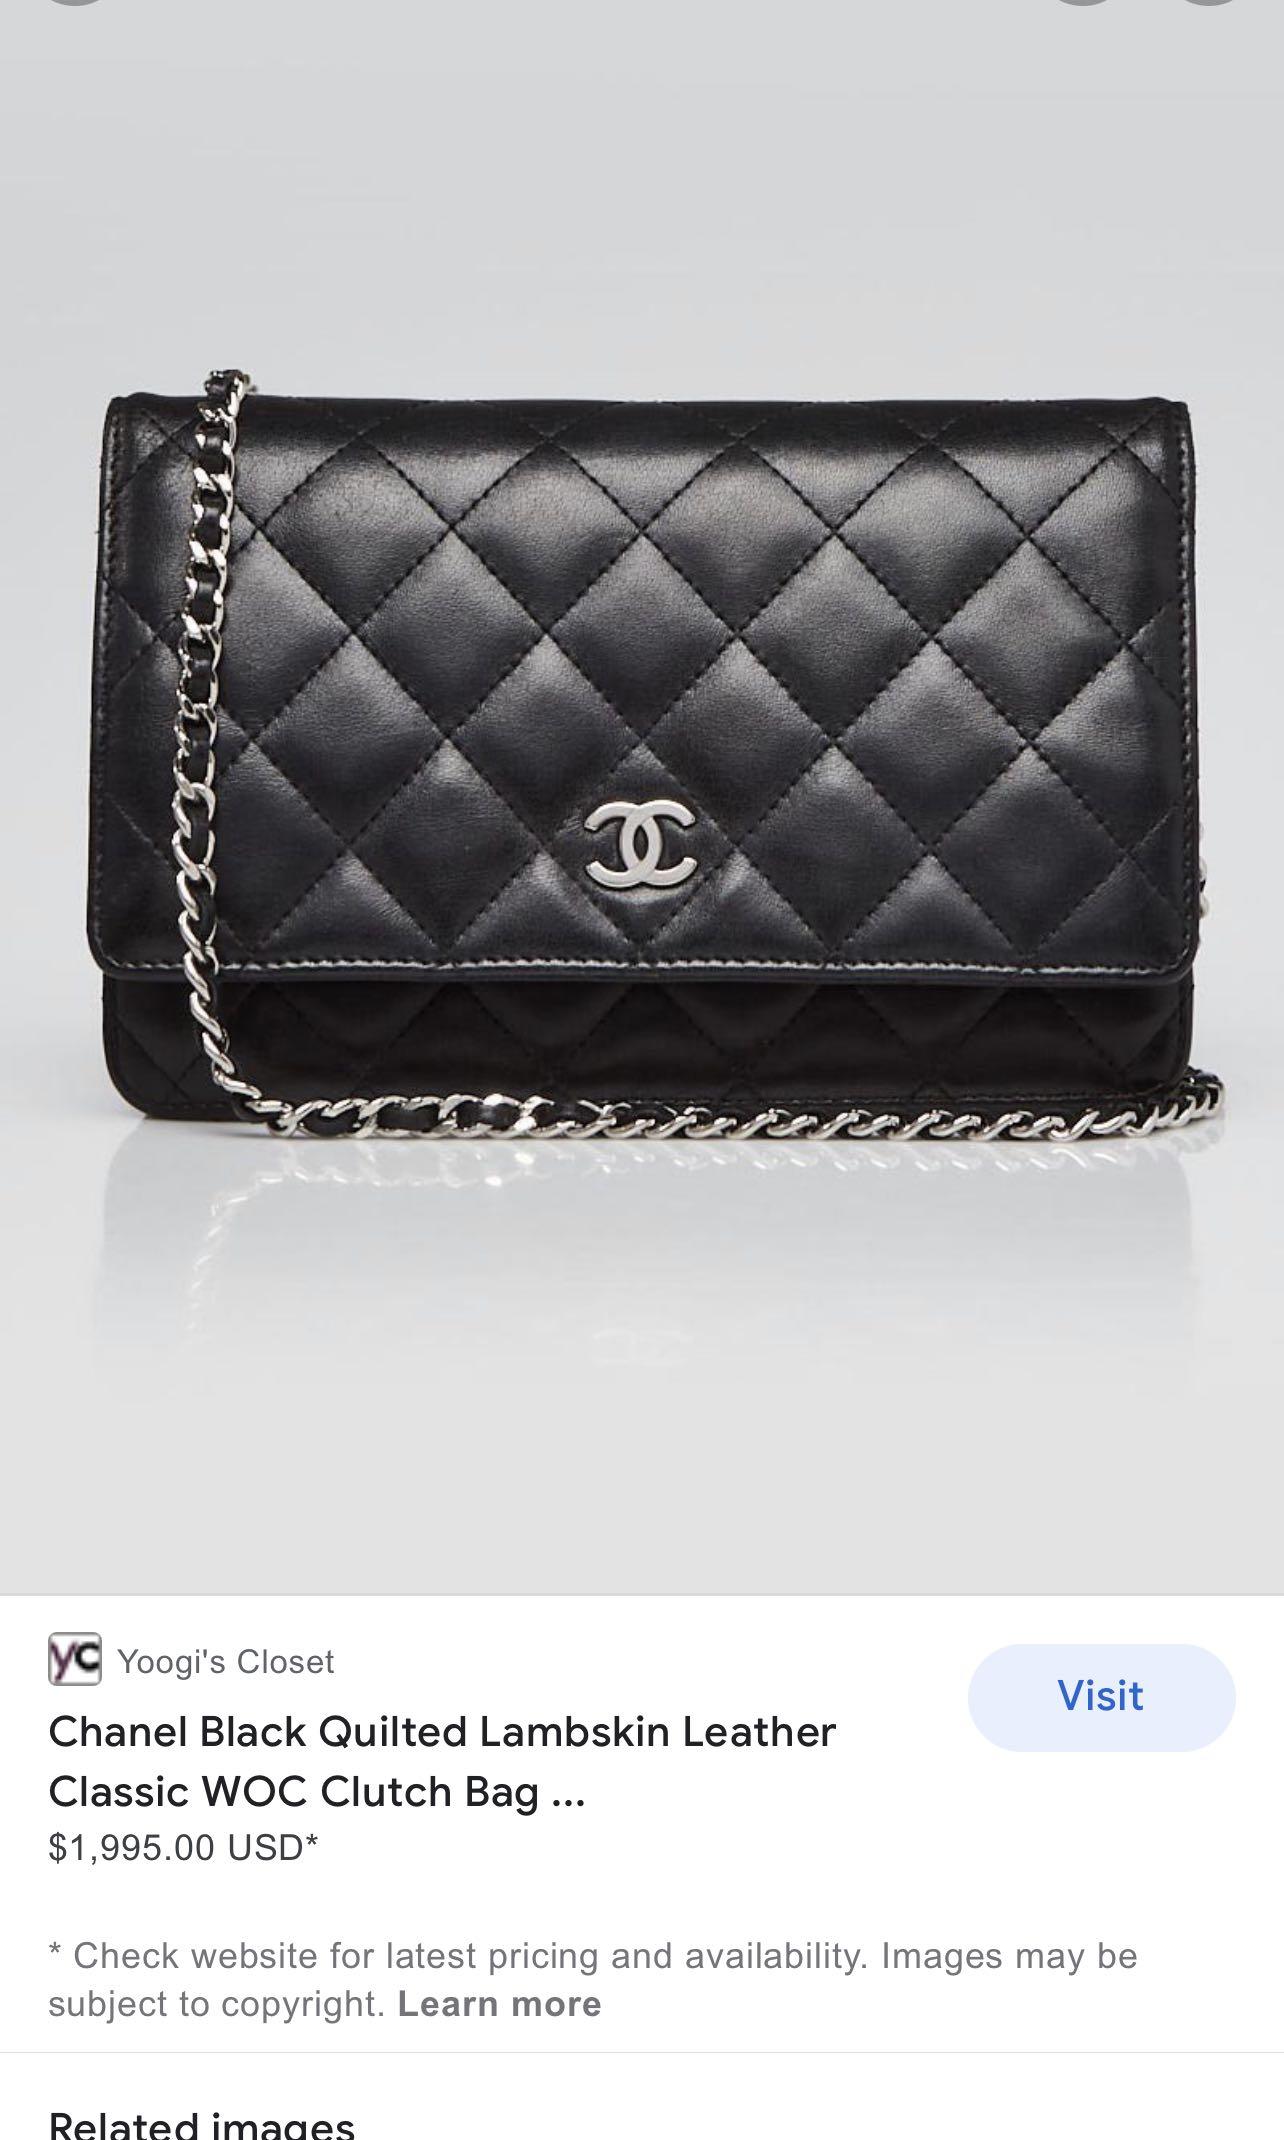 🌸JUST BACK FROM BAG SPA🌸 💖 💯 Authentic Chanel CC Classic Flap